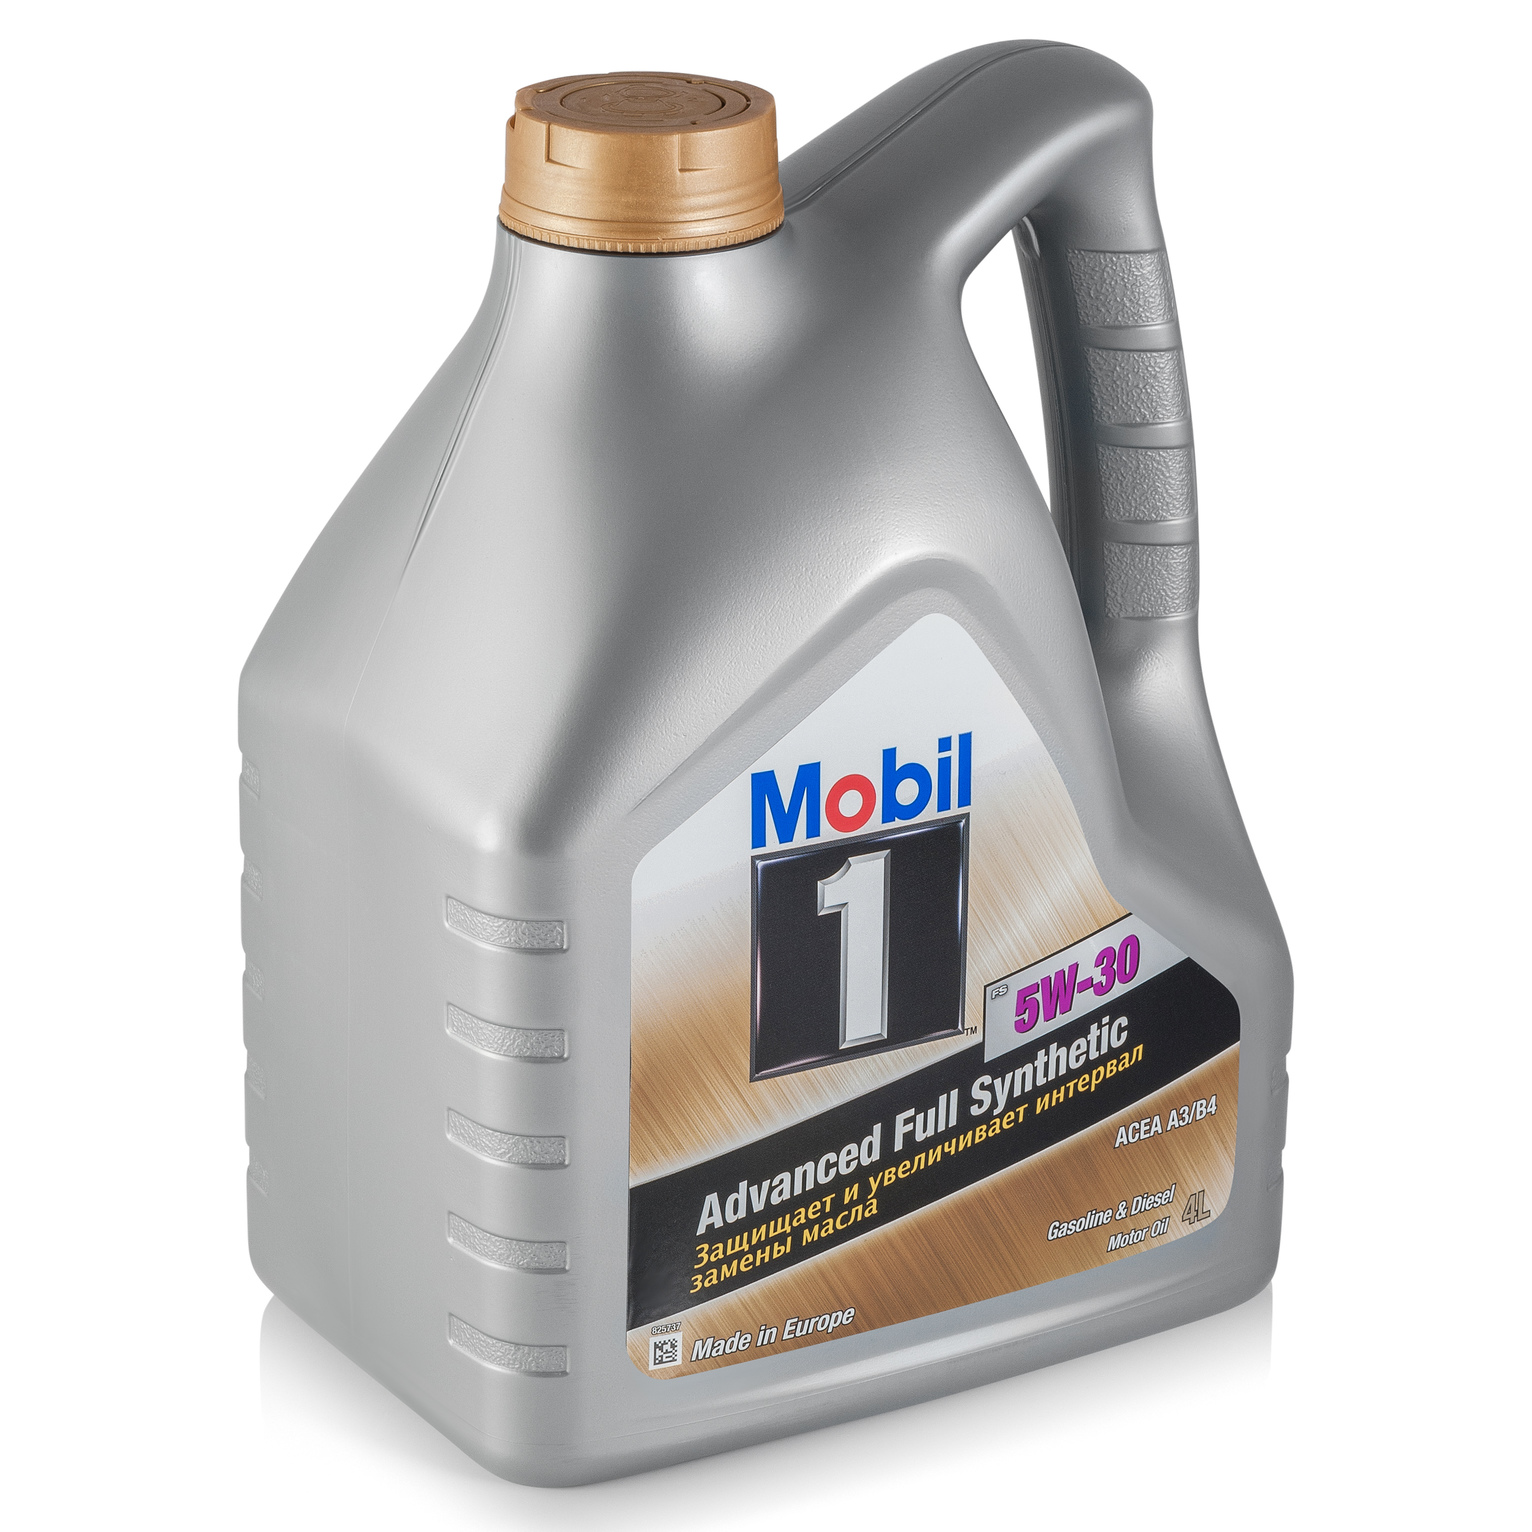 Engine oil Mobil 1 Full Synthetic 5W-30, 4L Mobil 153750